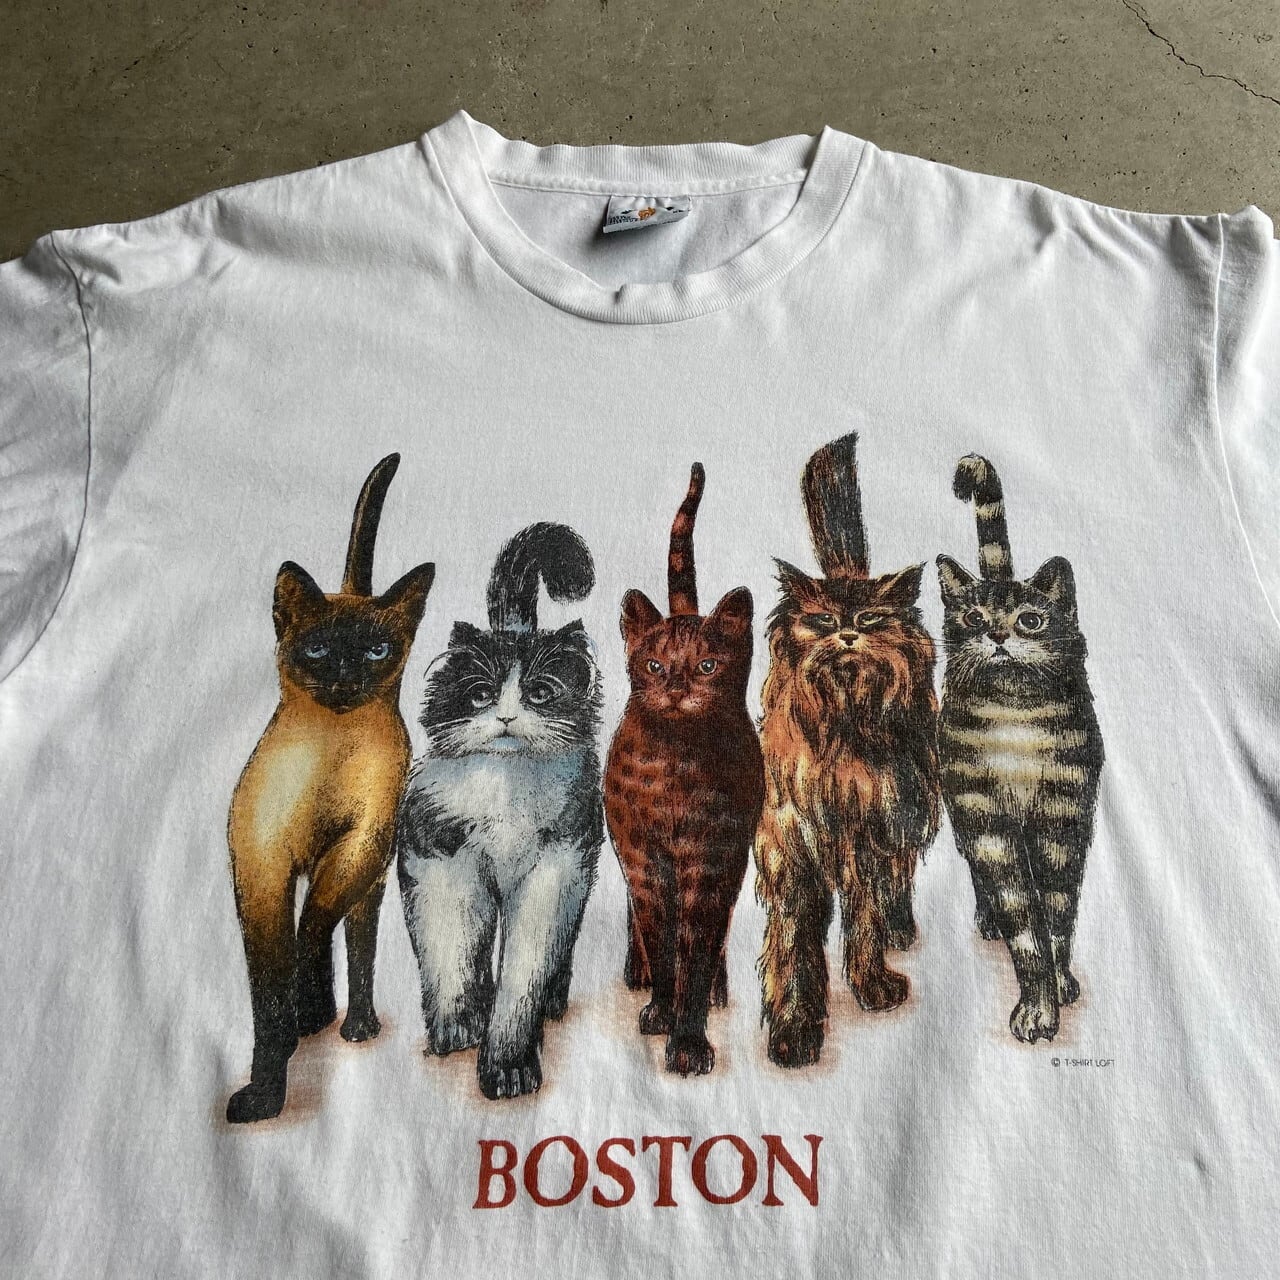 SALE／103%OFF】 80's 90's デザイン古着 ビンテージ 猫 プリントT 